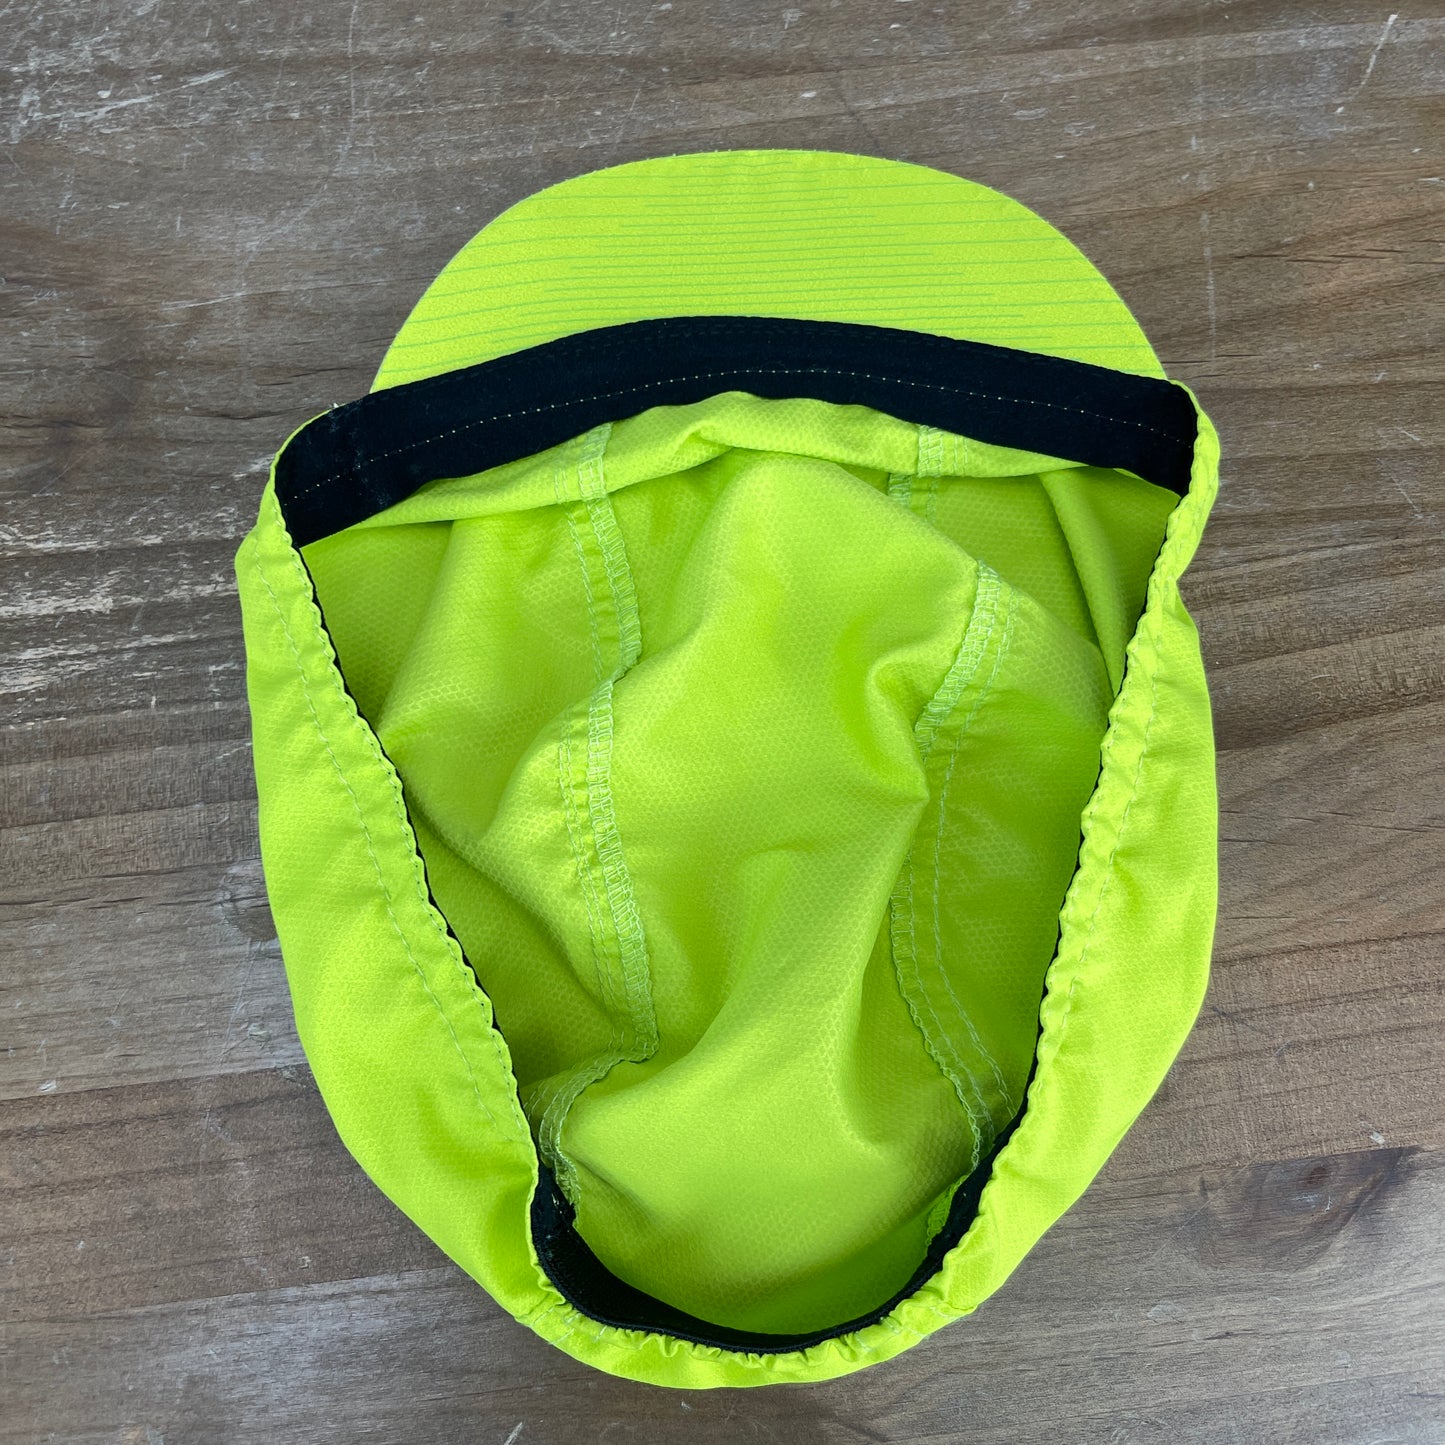 Specialized HyperViz Reflective Cycling Cap Three-PACK!